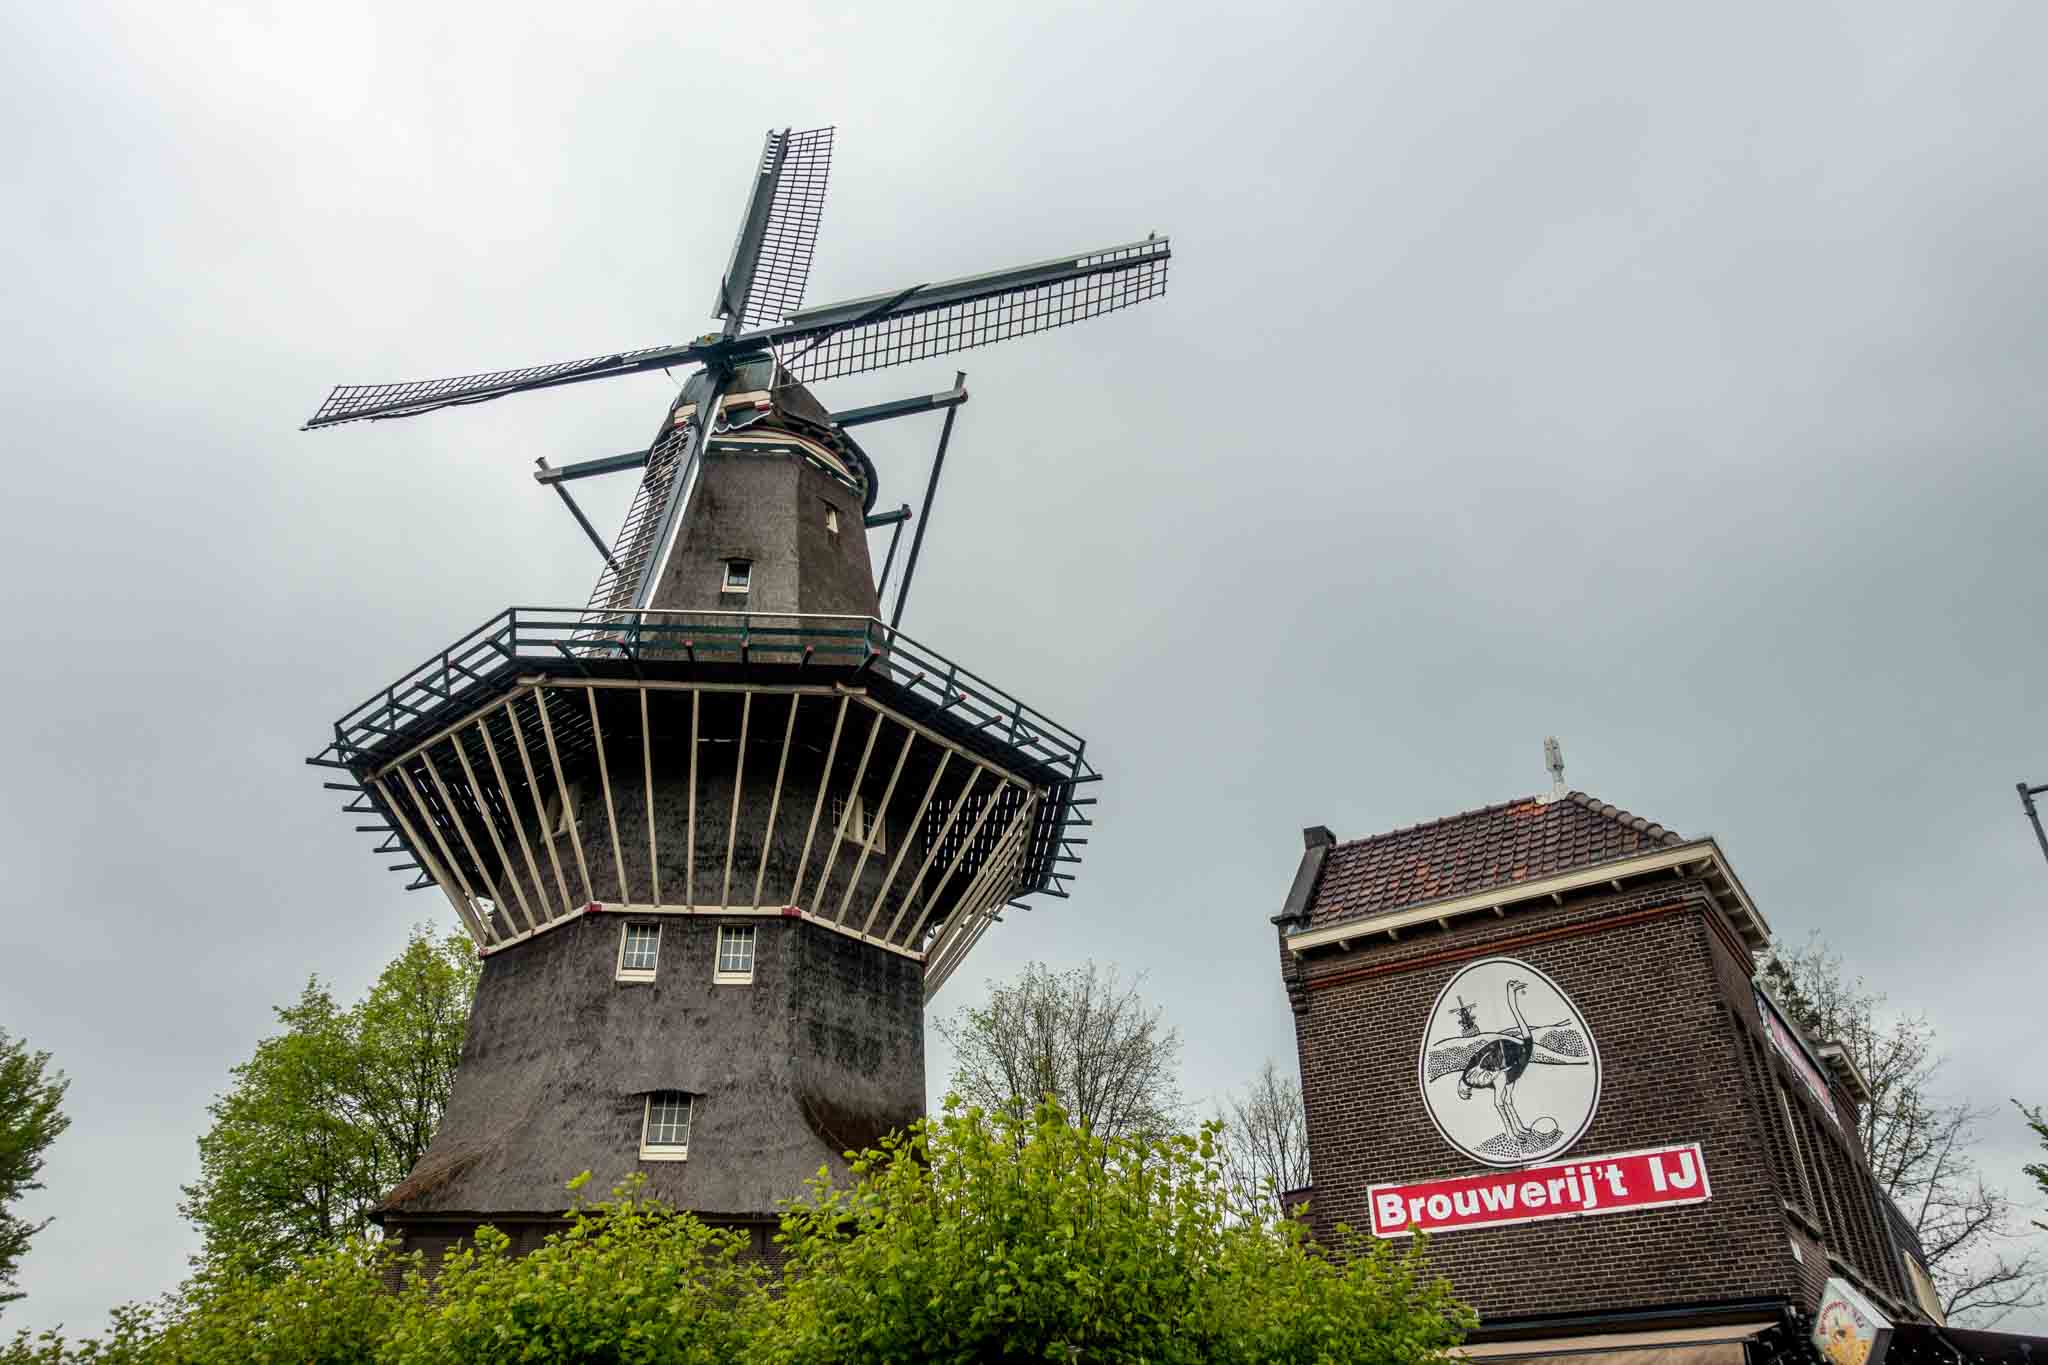 Windmill next to sign for Brouwerij 't IJ.